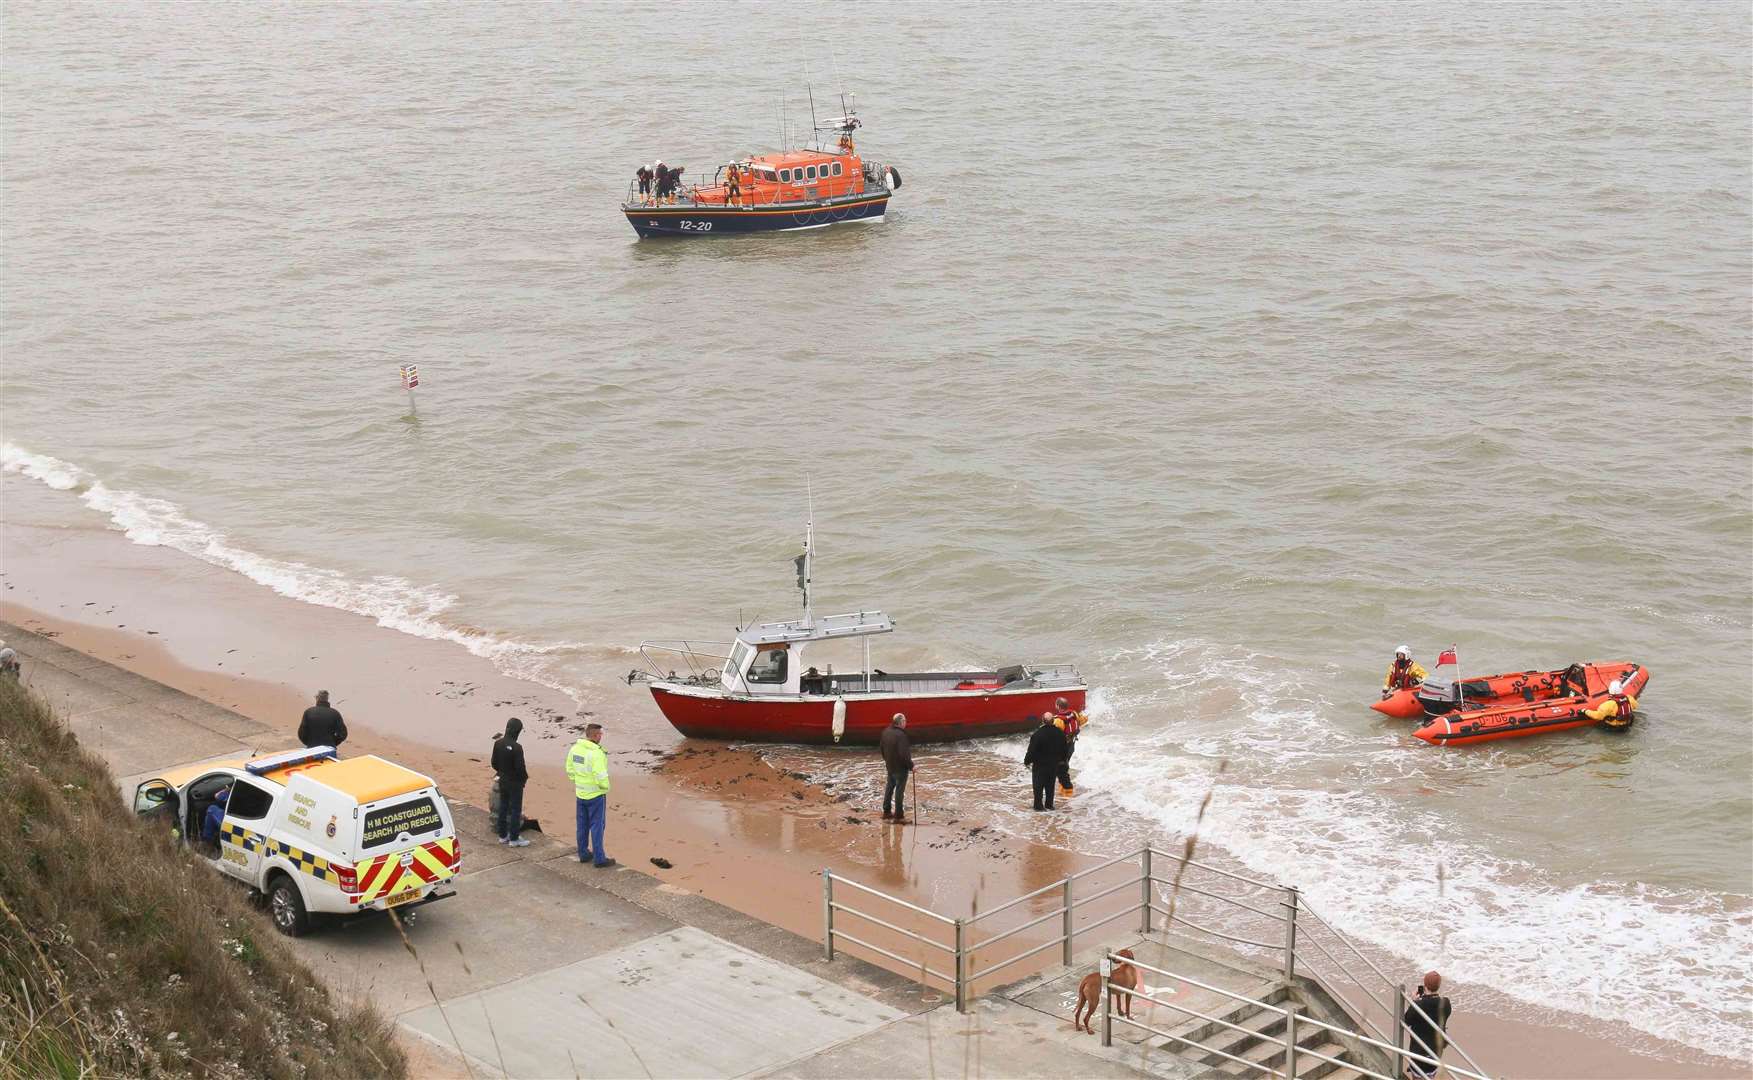 The vessel today. Credit: RNLI Margate (8314275)